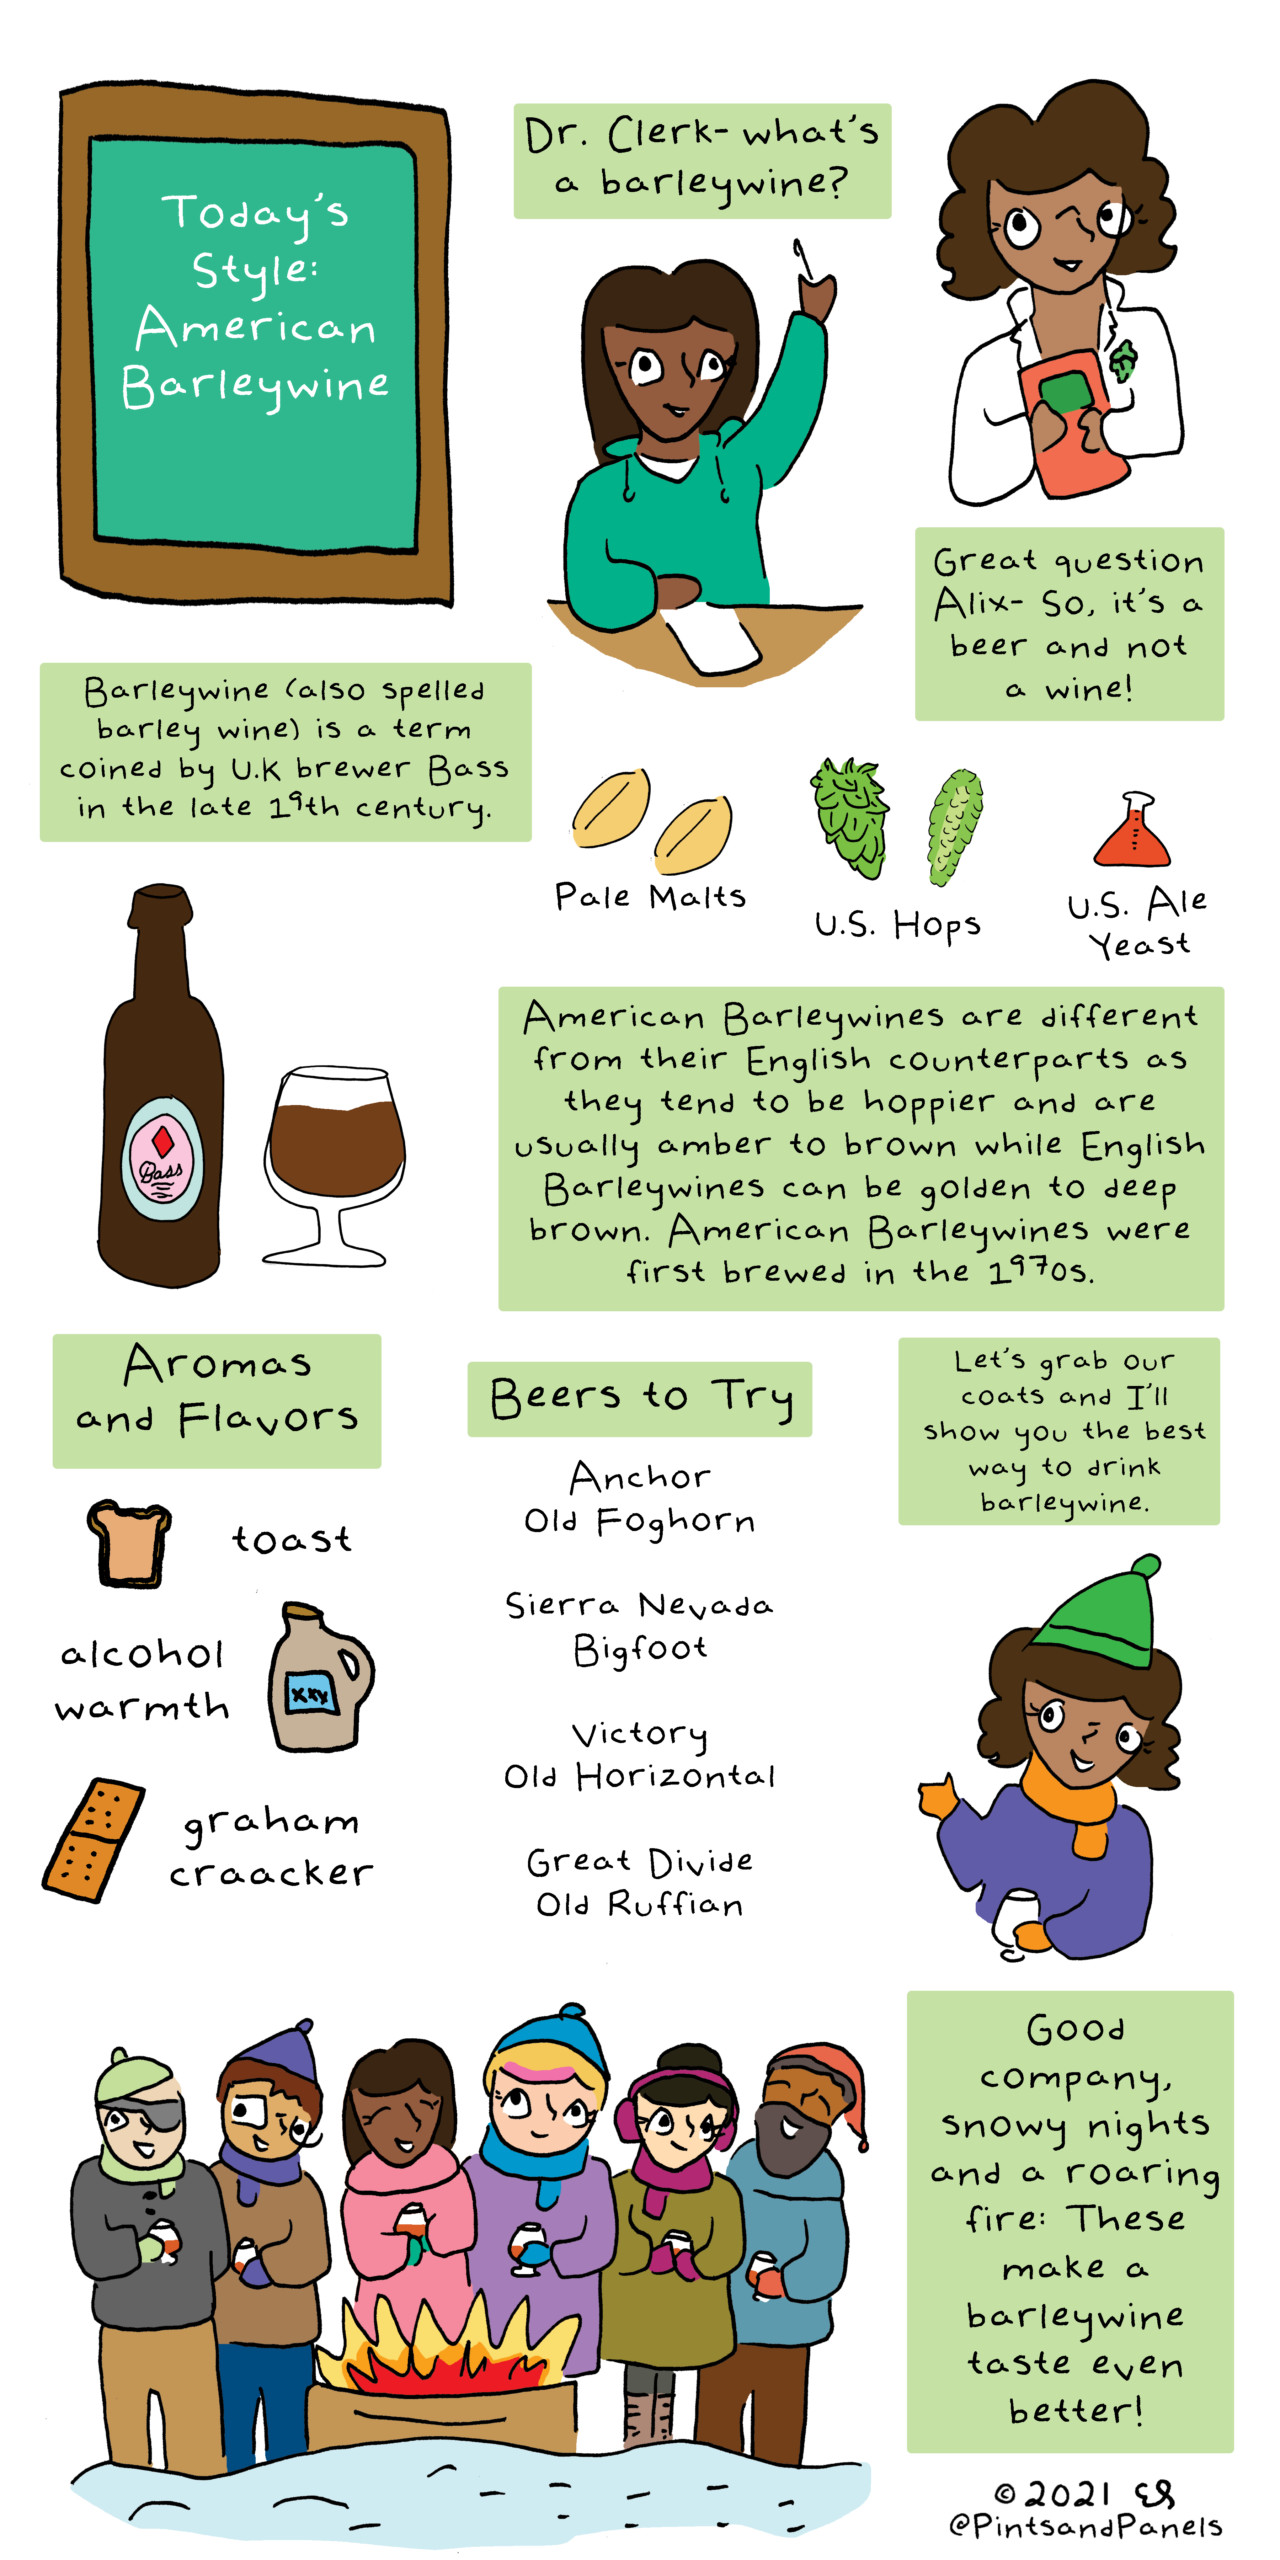 In this week's Ale Academy lesson, we discuss barleywine